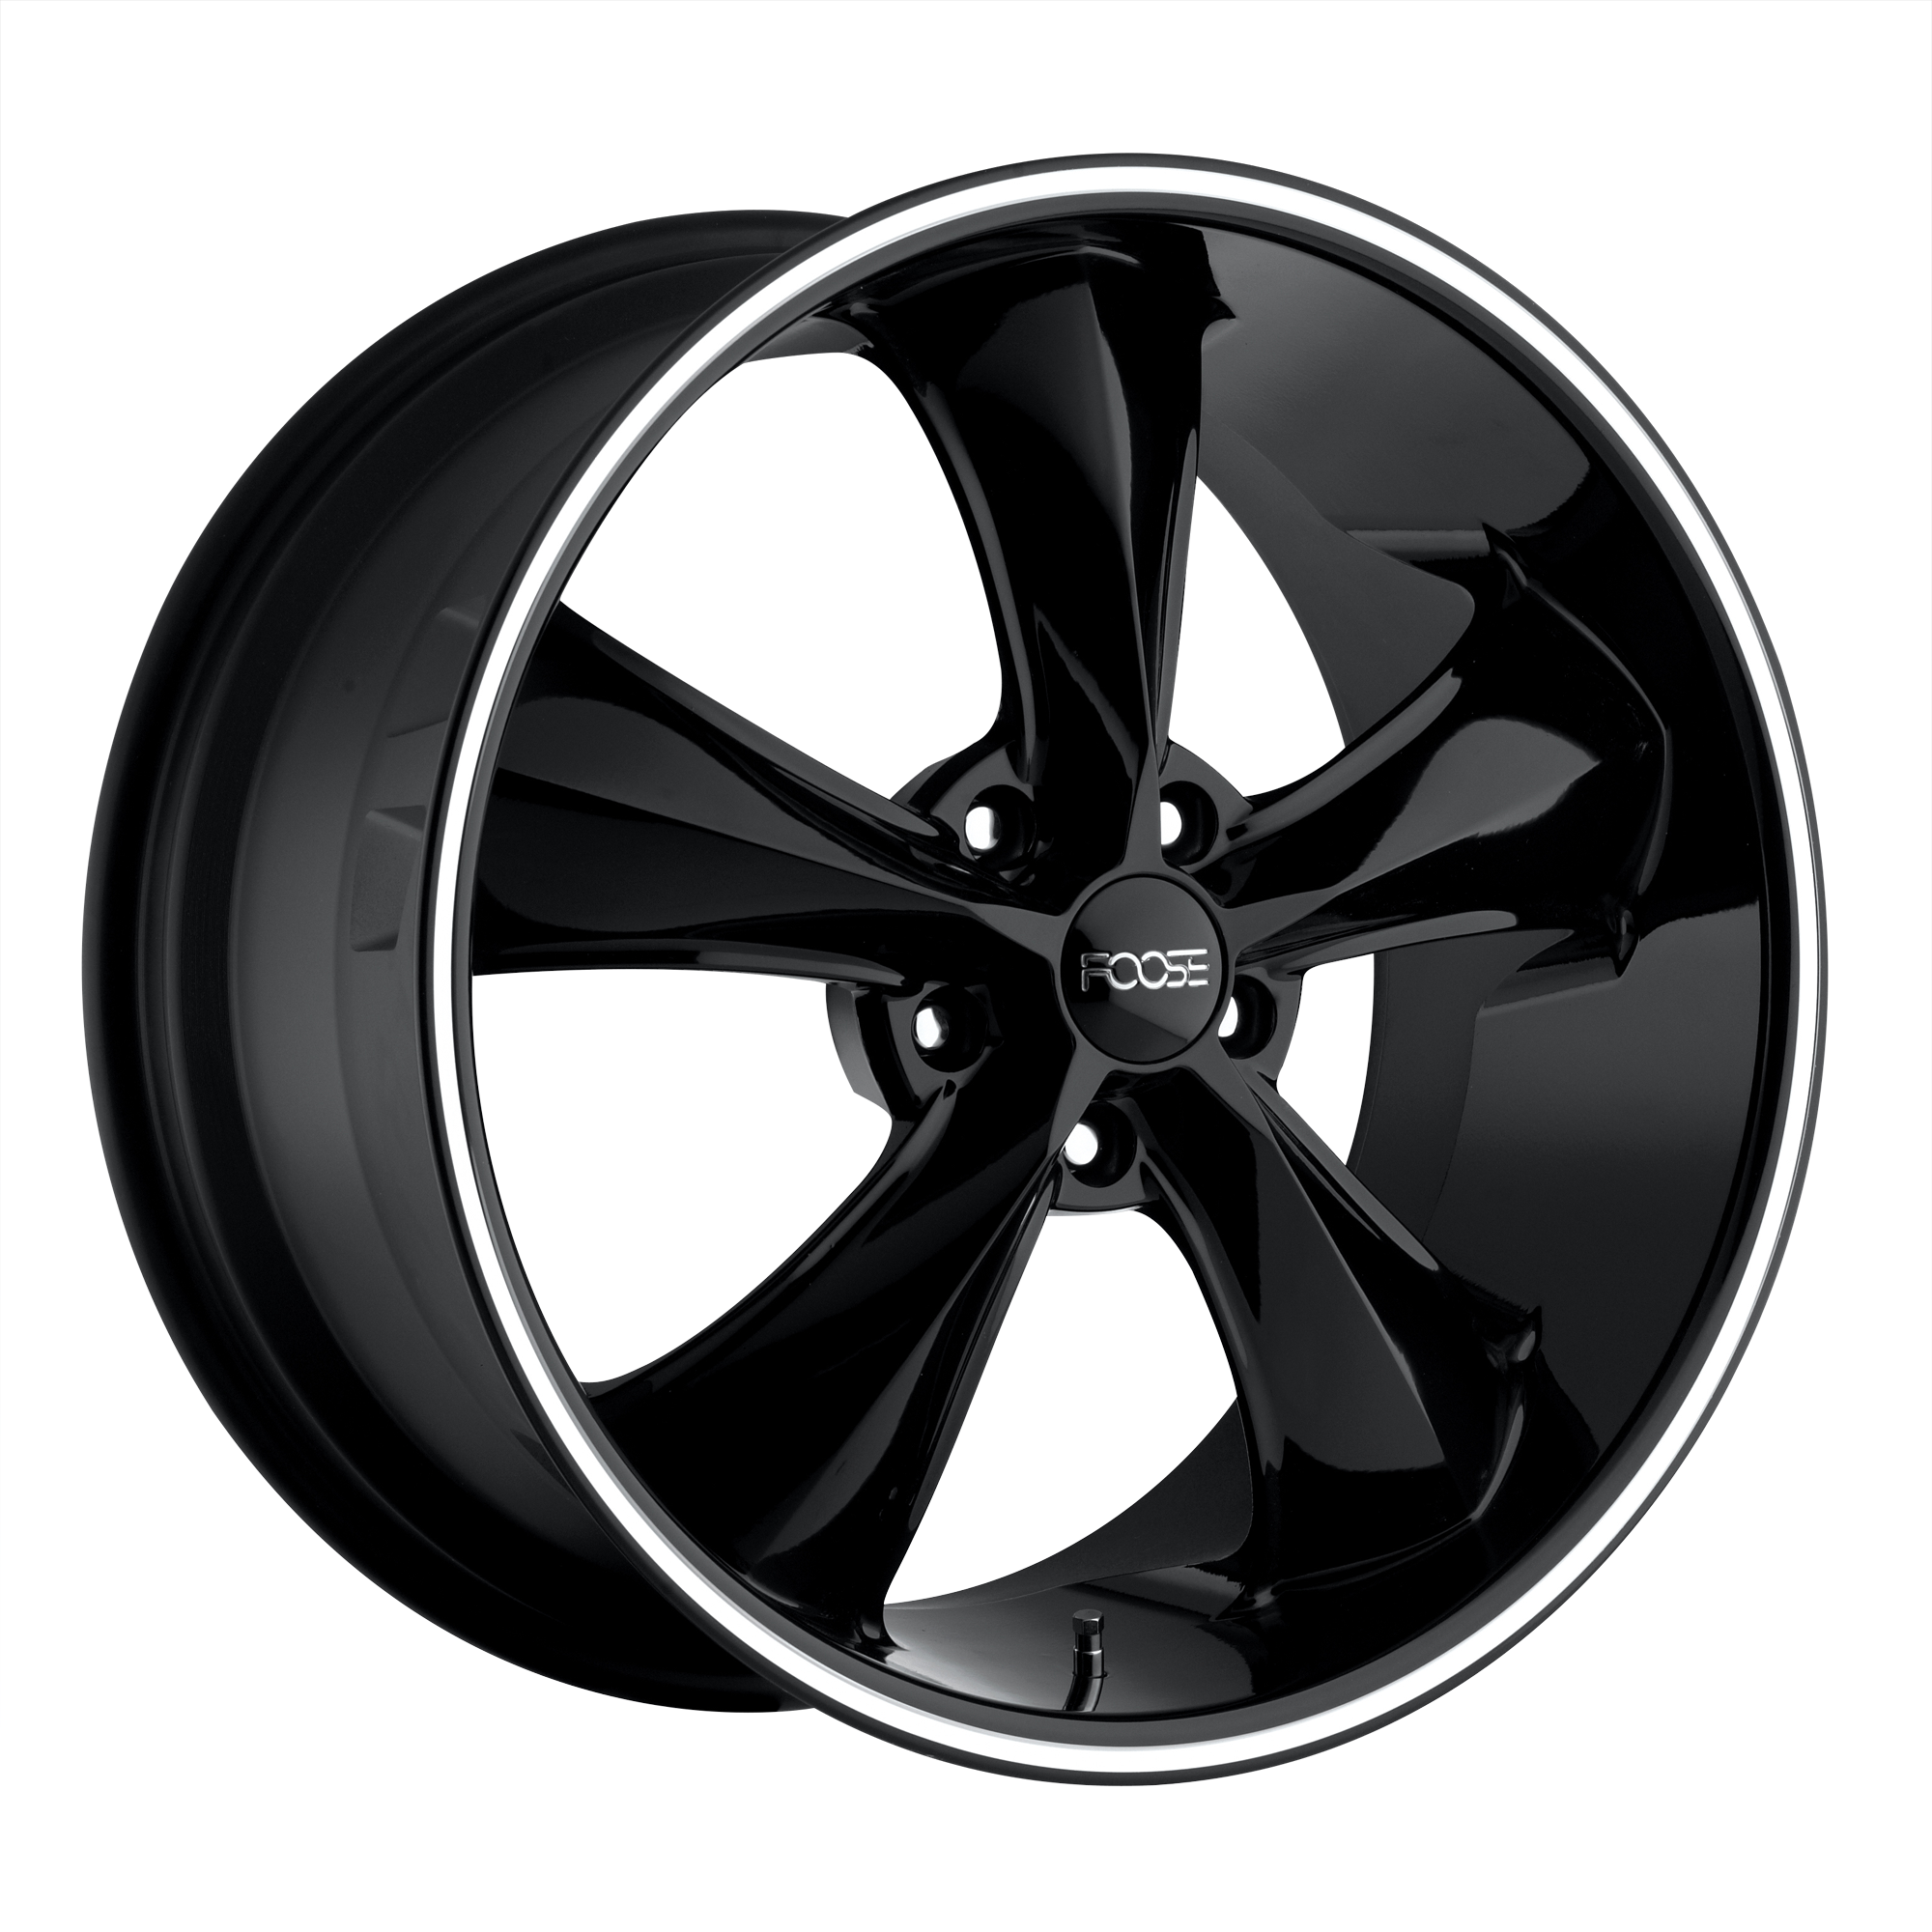 LEGEND 17x8 5x120.65 GLOSS BLACK MILLED (1 mm) - Tires and Engine Performance